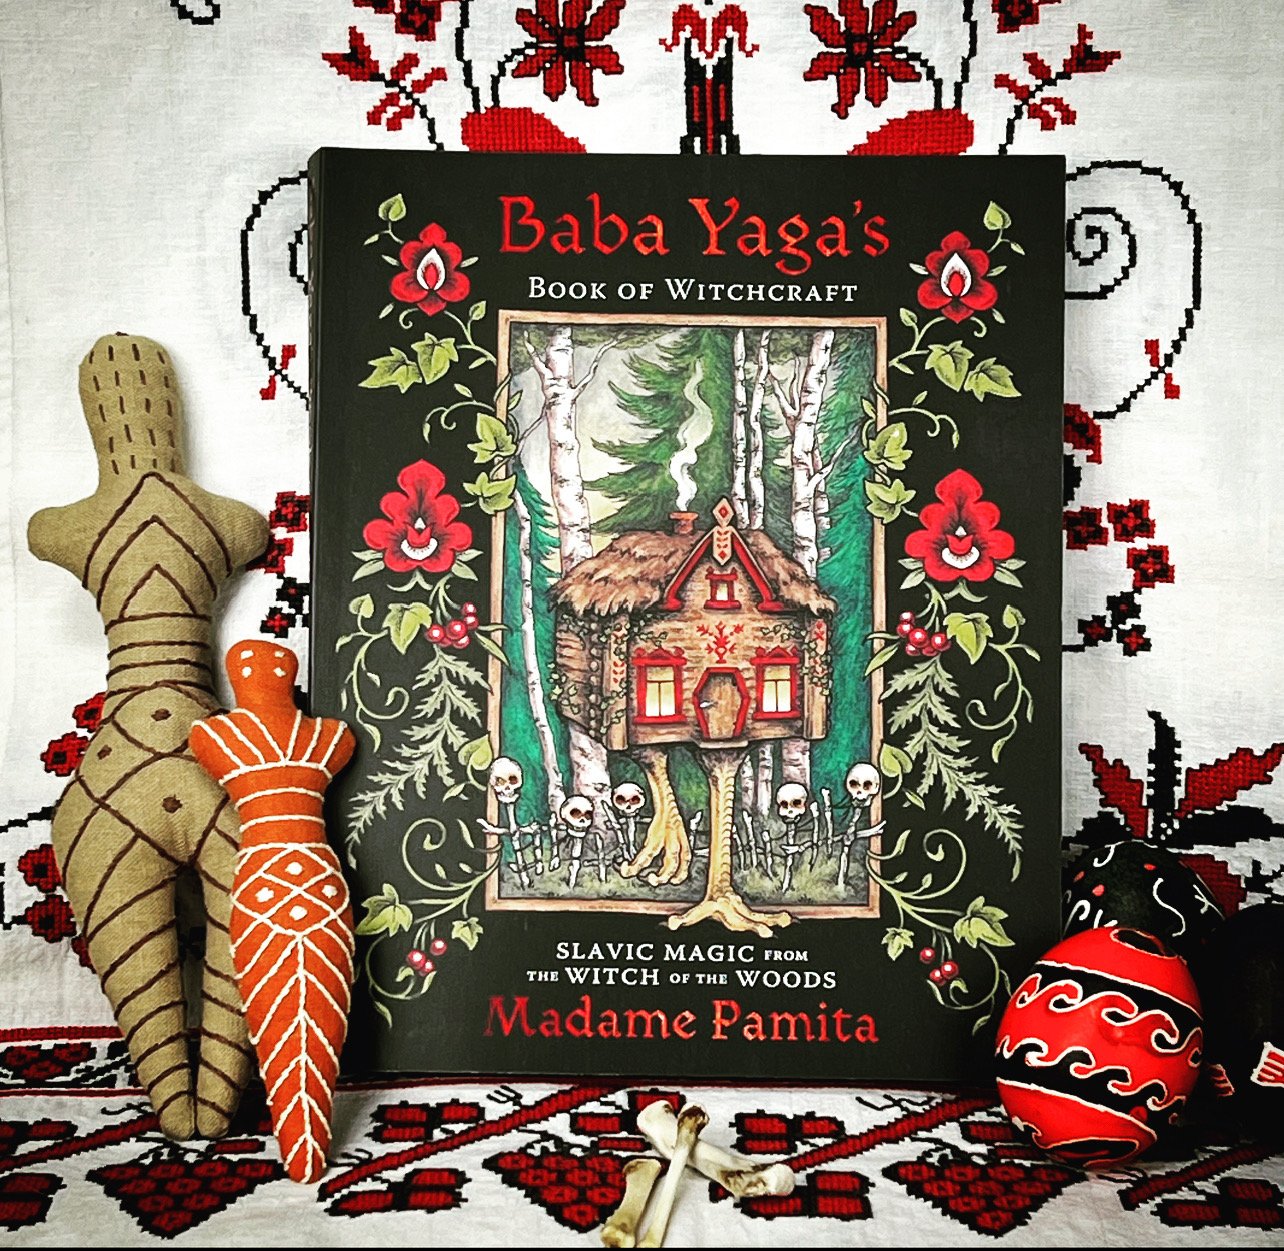 Become A Wise Woman With New Baba Yaga Spiritually Empowering Folklore Book